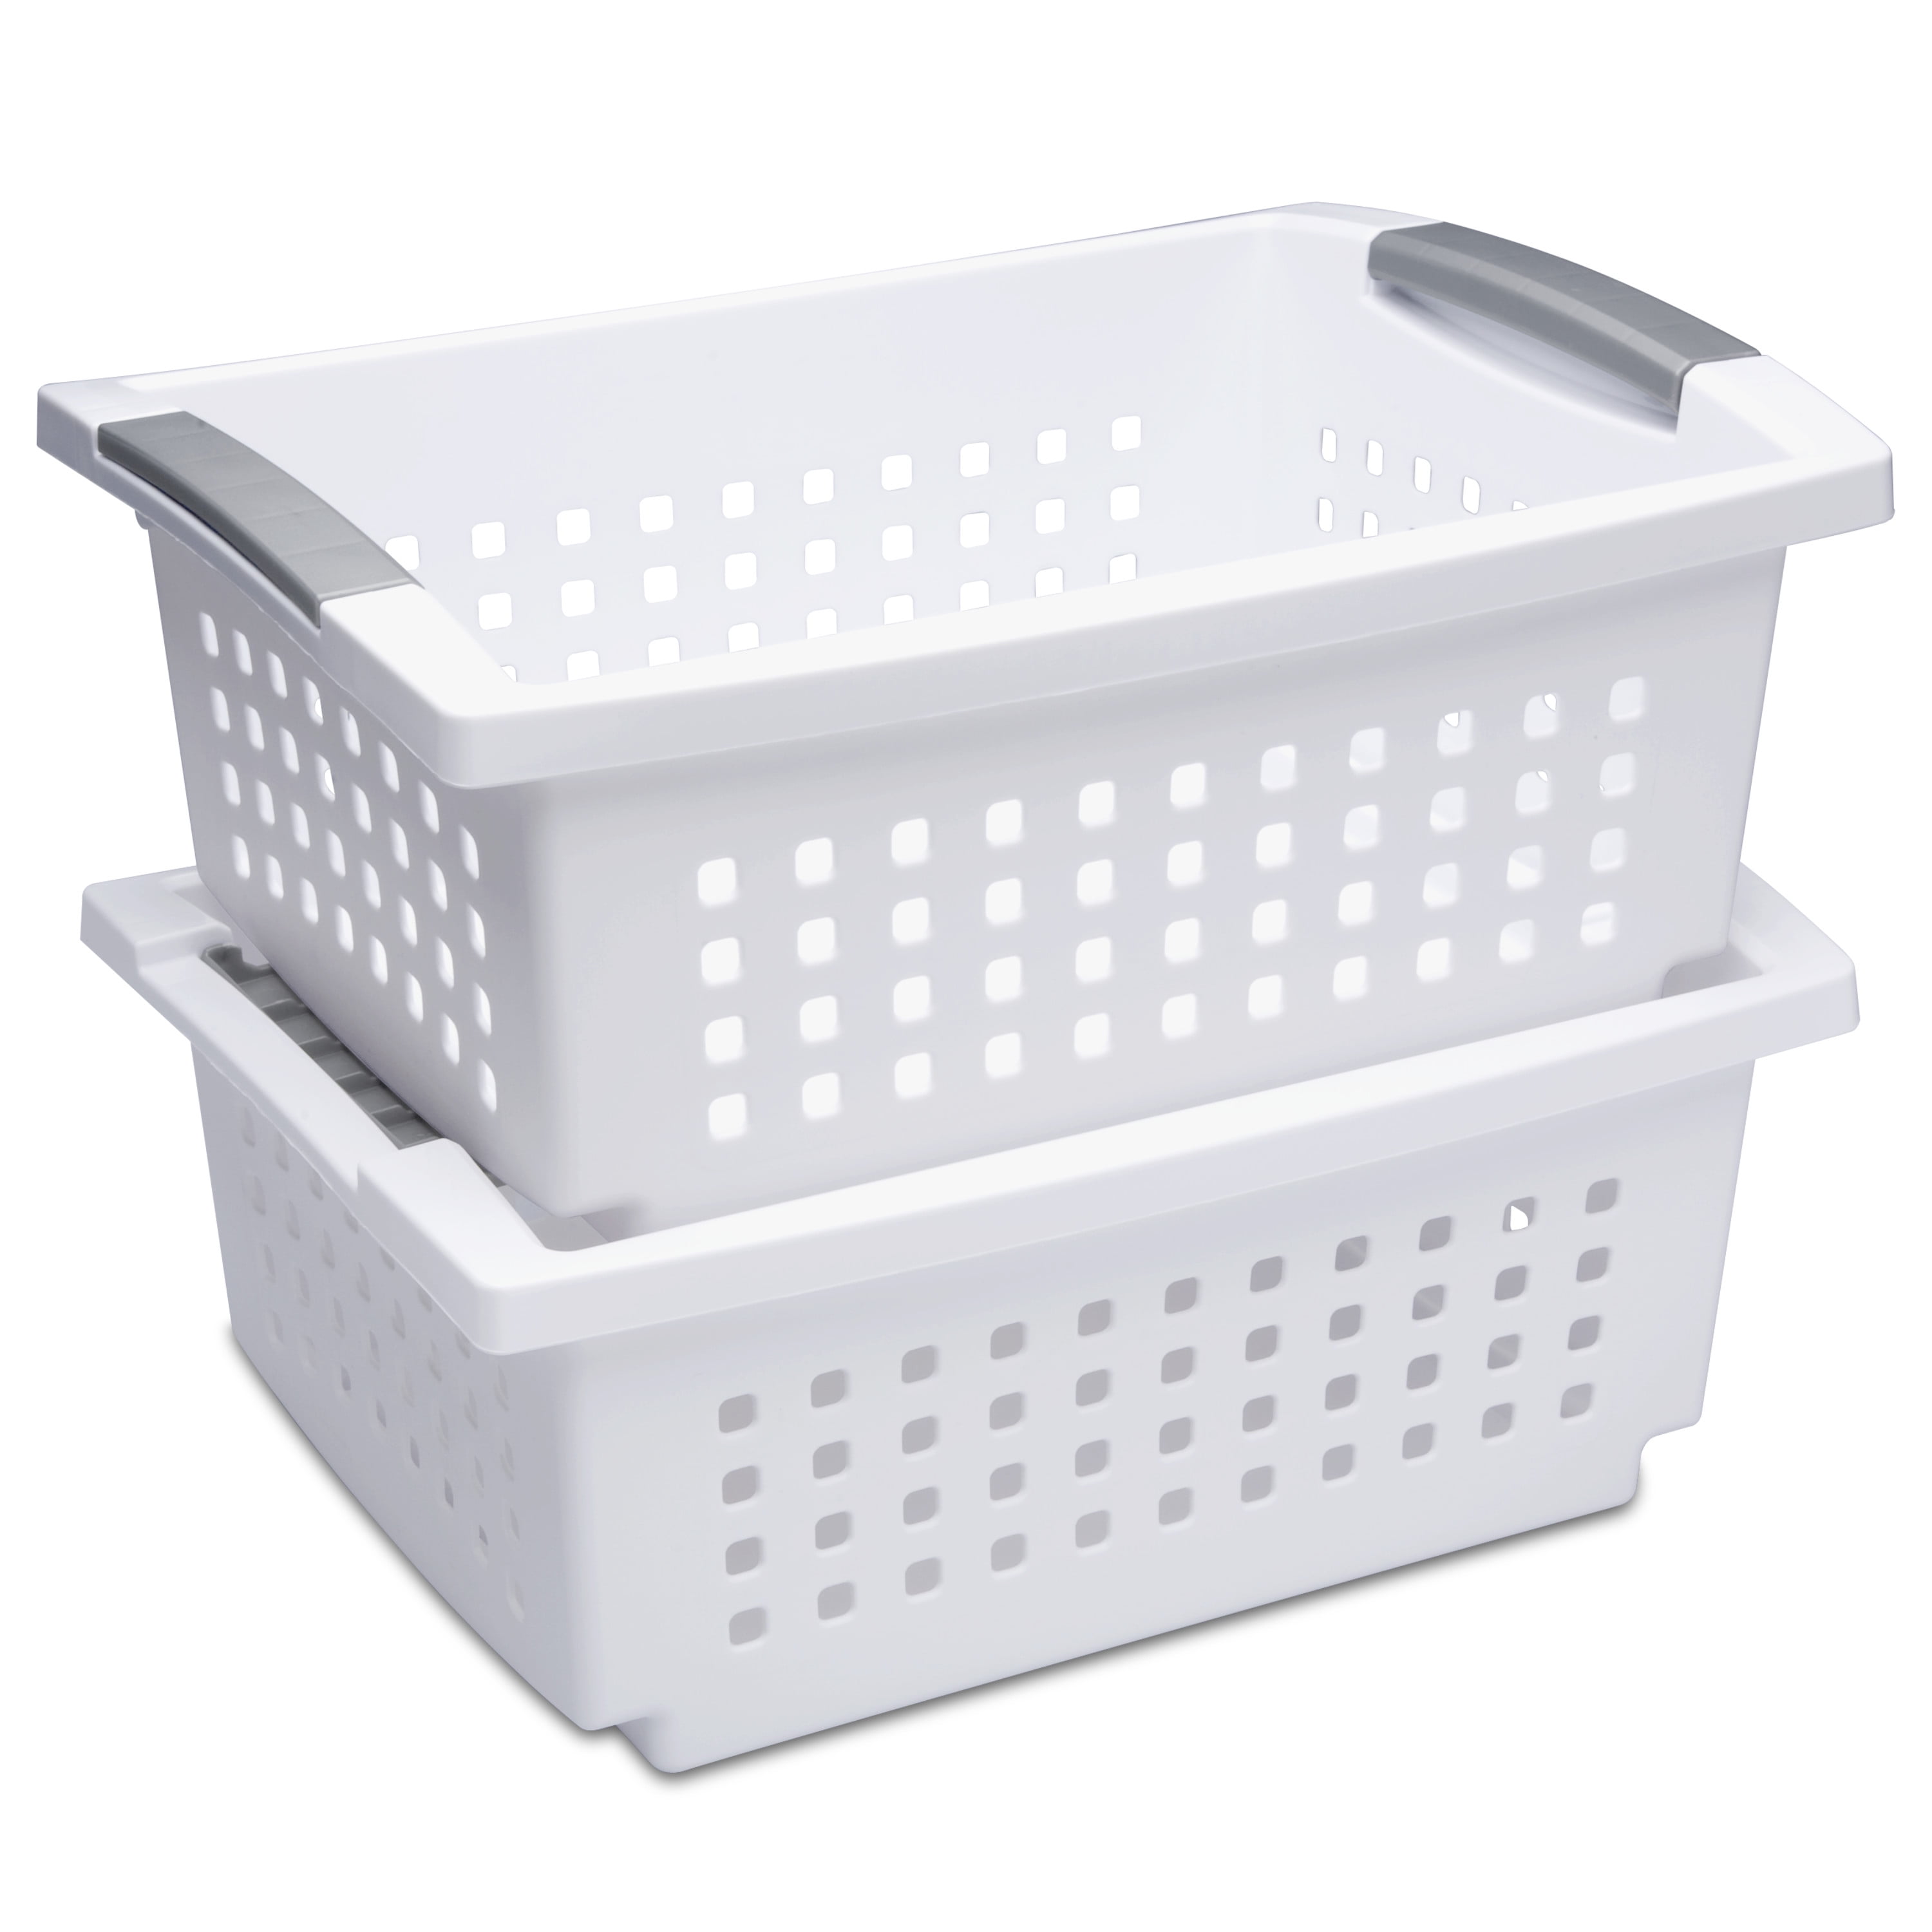 Sterilite Small Plastic Stacking Storage Basket Container Totes w/ Comfort  Grip Handles and Flip Down Rails for Household Organization, White, 8 Pack